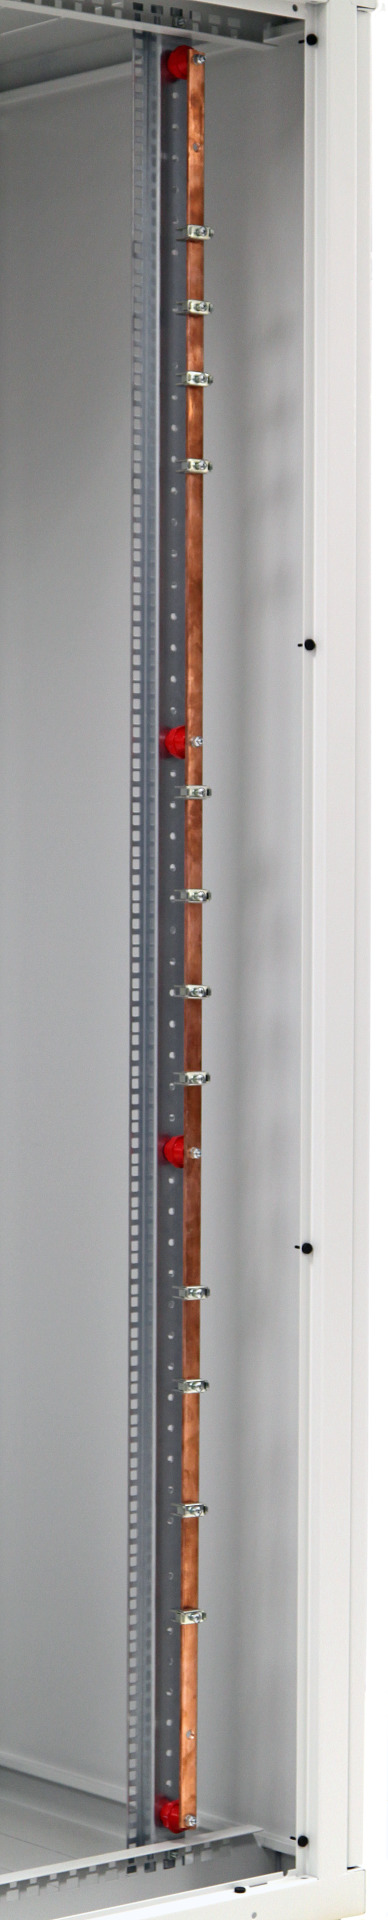 Earthing Bar for Network Cabinets 42U, Vertical, incl. 12 x Busbar Clamp